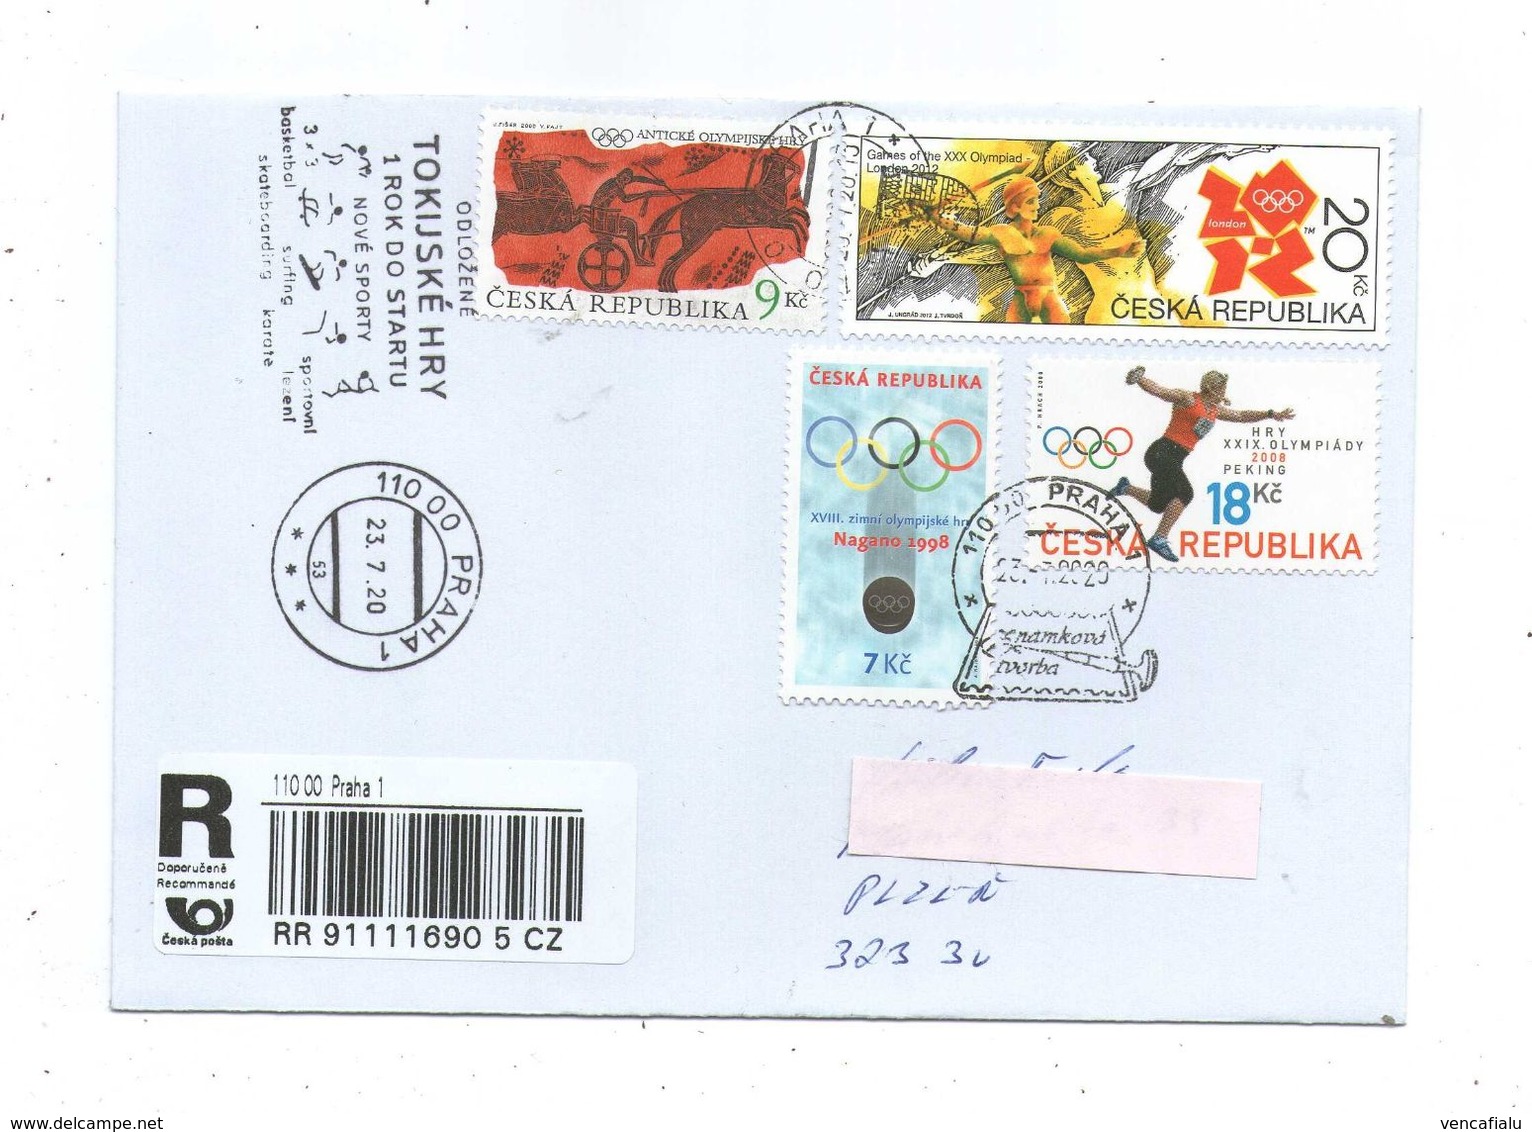 Czech Republic 2020 - Moving The Deadline By One Year, Special Postmark, Postage Registered Used, Nice Stamps - Eté 2020 : Tokyo